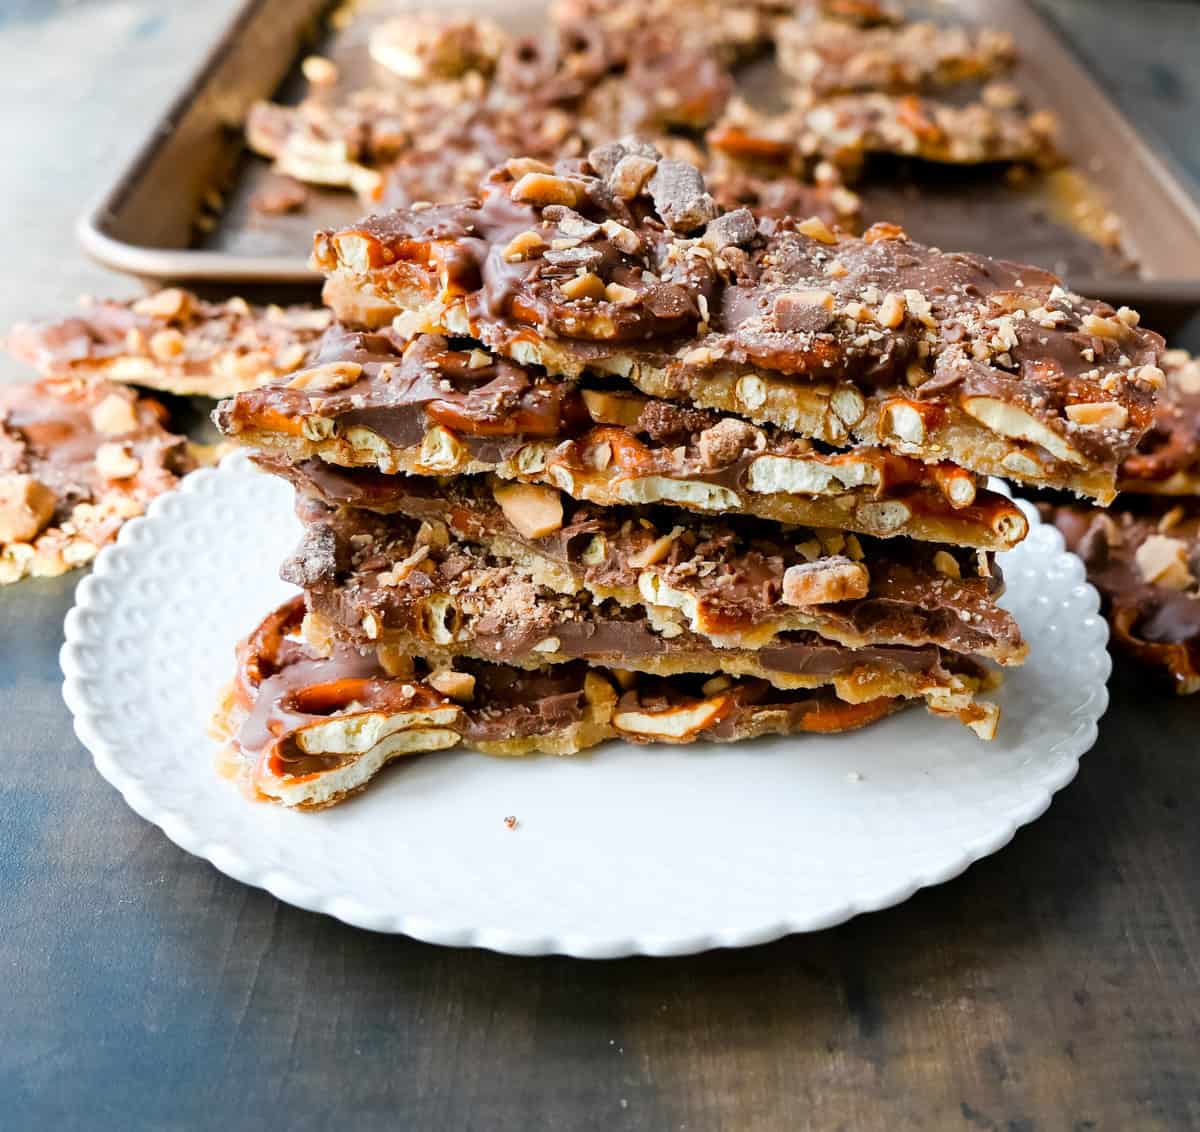 Toffee Pretzel Christmas Crack. This is Christmas Crack but even better! This homemade chocolate toffee bark is made with crunchy pretzels, soft buttery toffee, rich chocolate, and Heath bar chocolate toffee bits. This is a super easy Christmas crack recipe and perfect to share around the holidays.